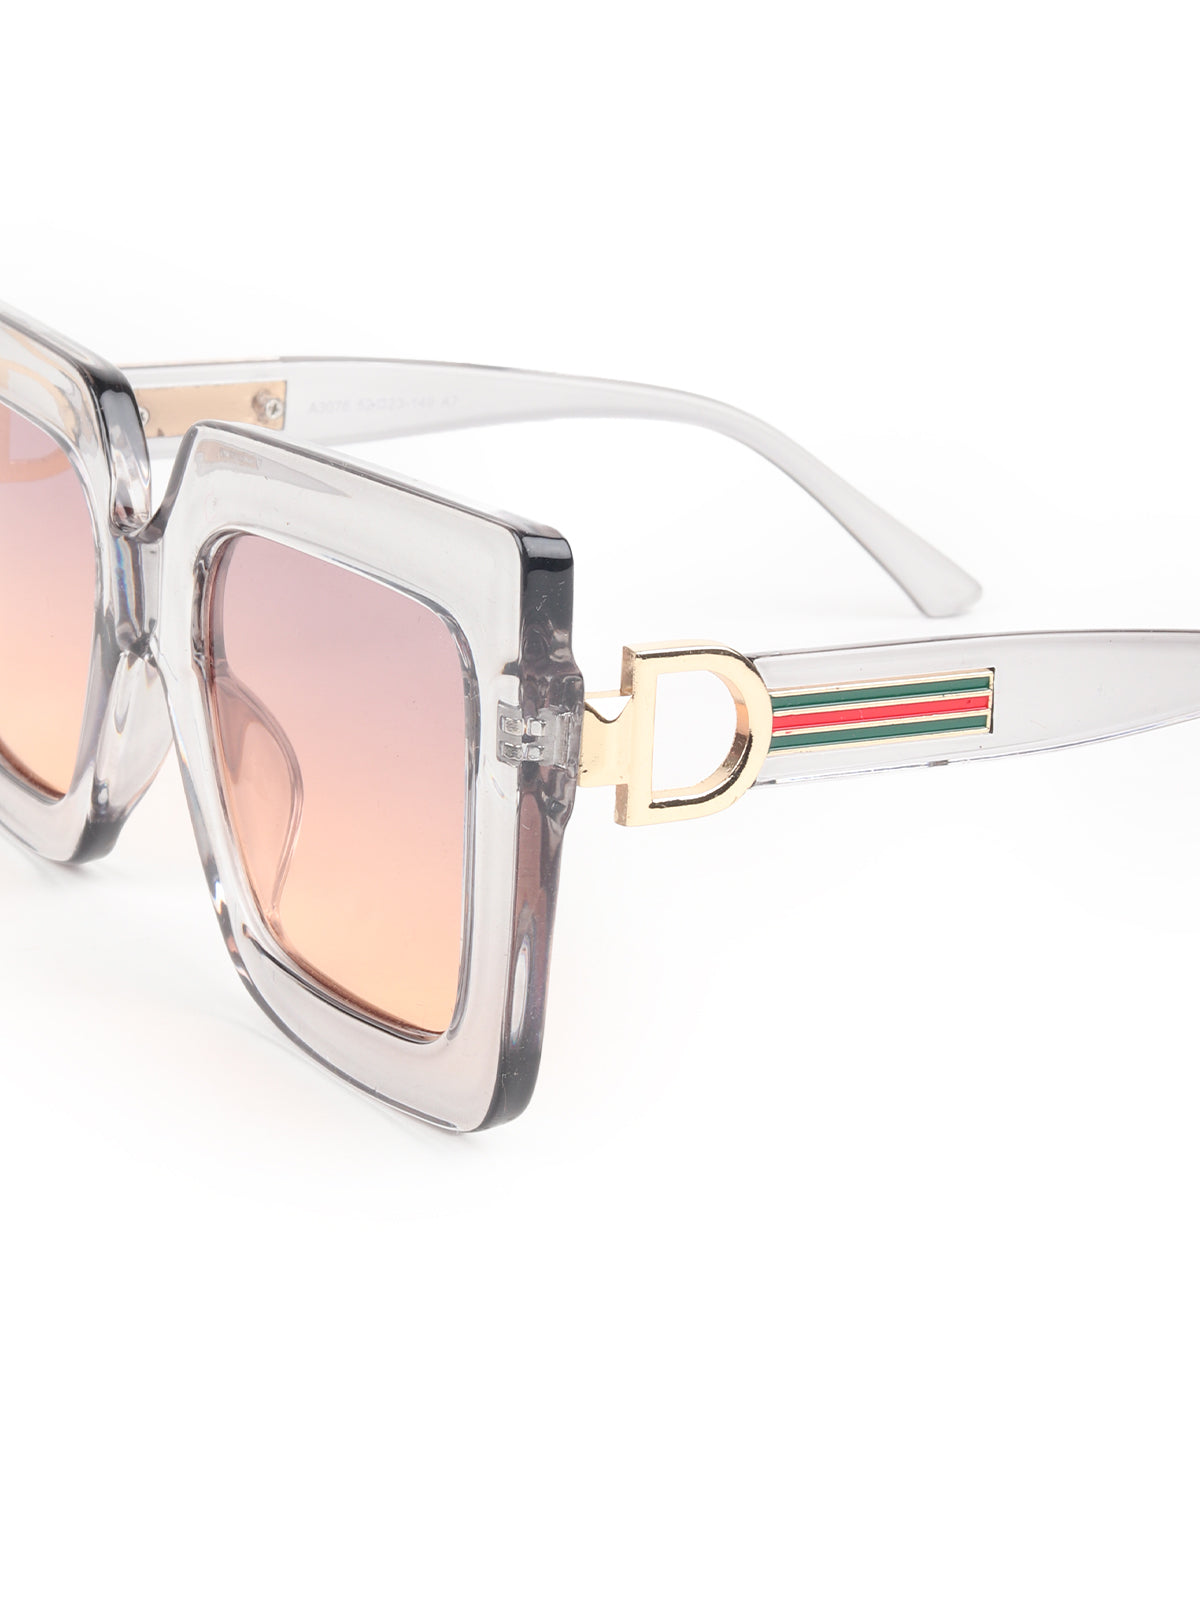 Odette Grey and Tan Acrylic Oversized Sunglasses for Women